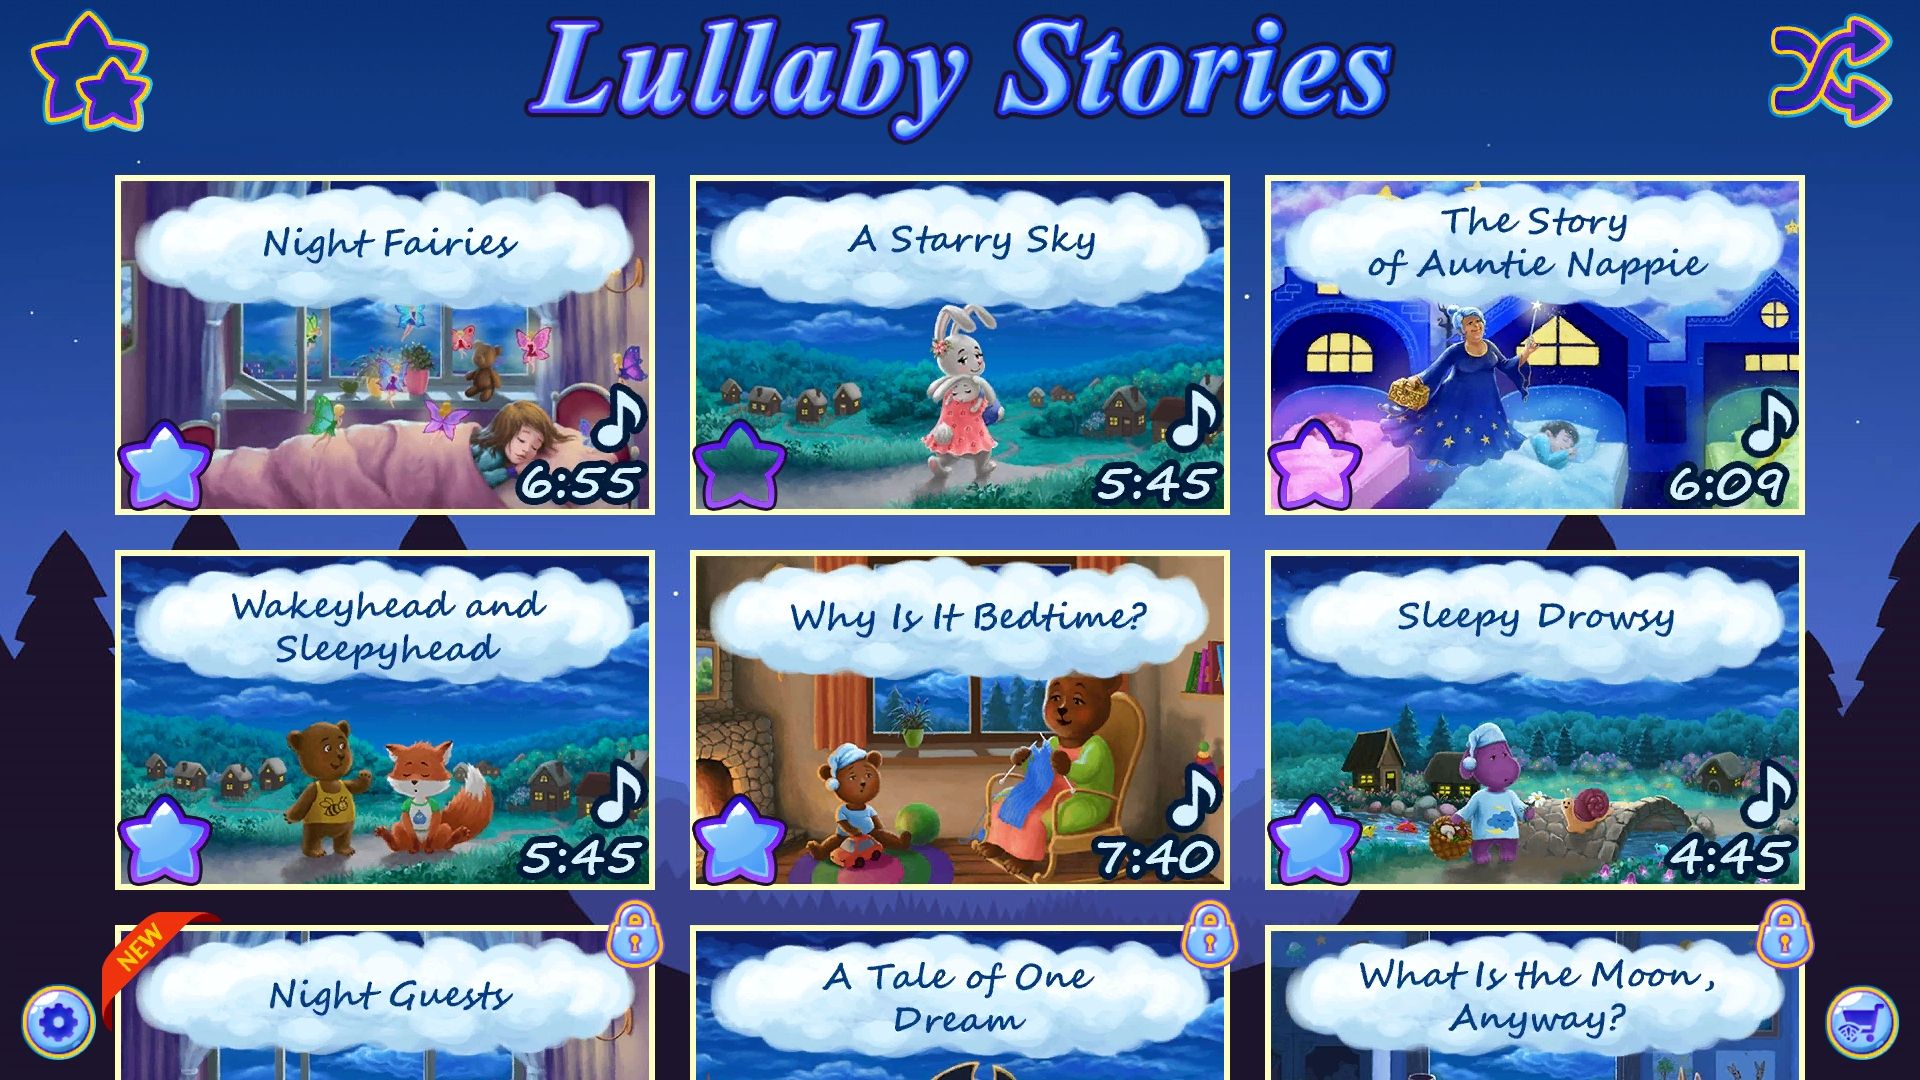 Bedtime Audio Stories for Kids lullaby stories mobile app for kids